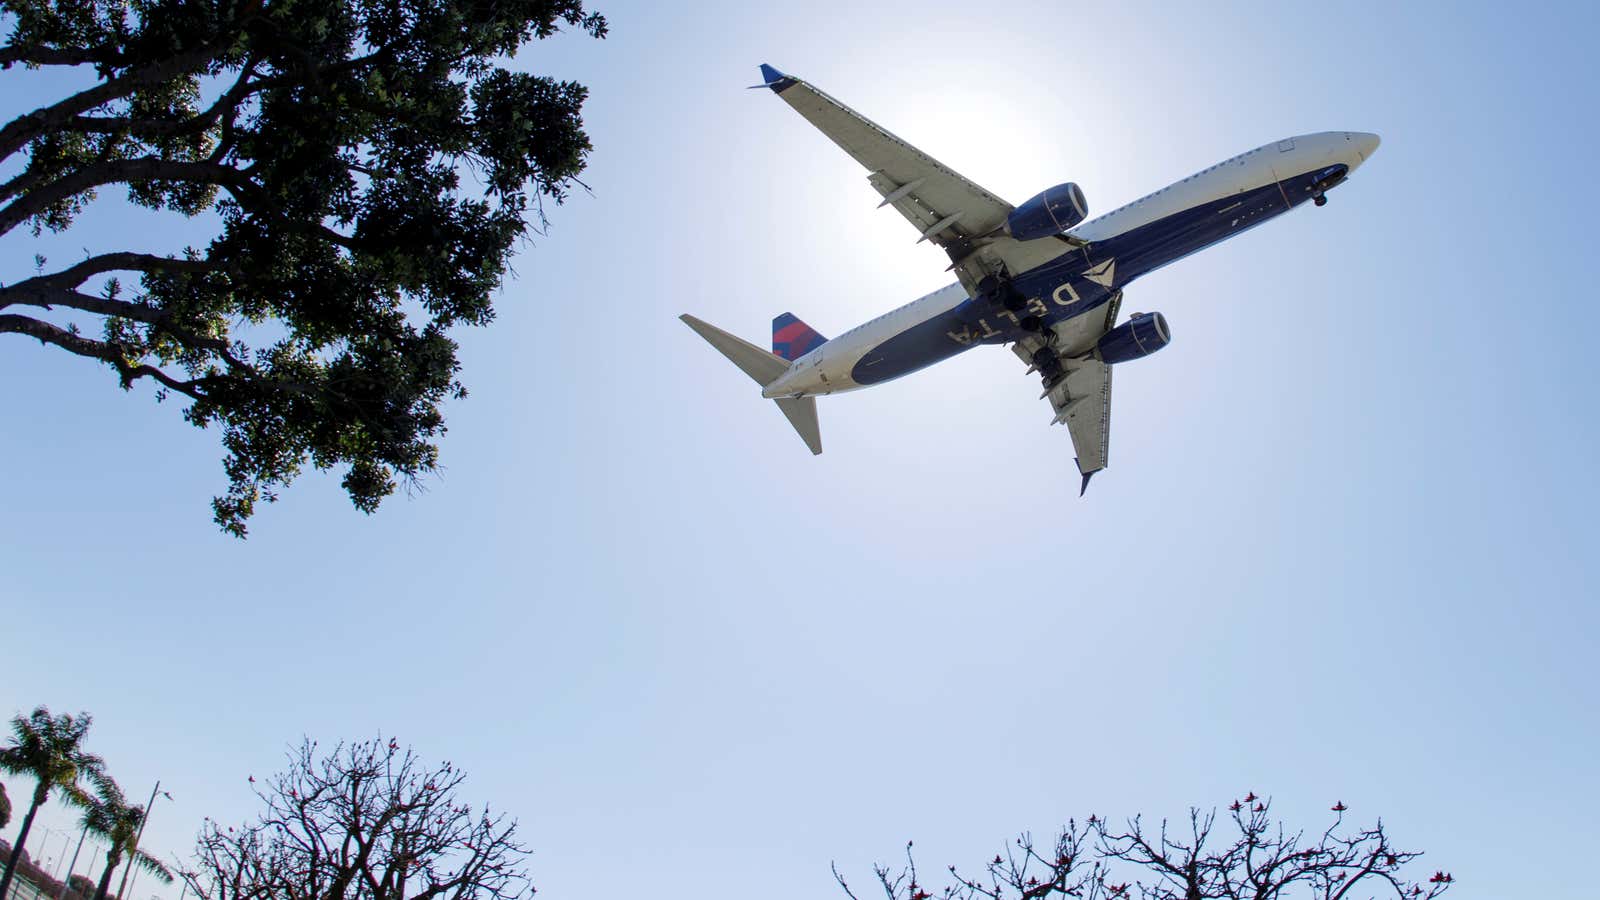 A Delta Airlines passenger jet approaches to land at LAX during the outbreak of the coronavirus disease (COVID-19) in Los Angeles, California, U.S., April 7, 2021.